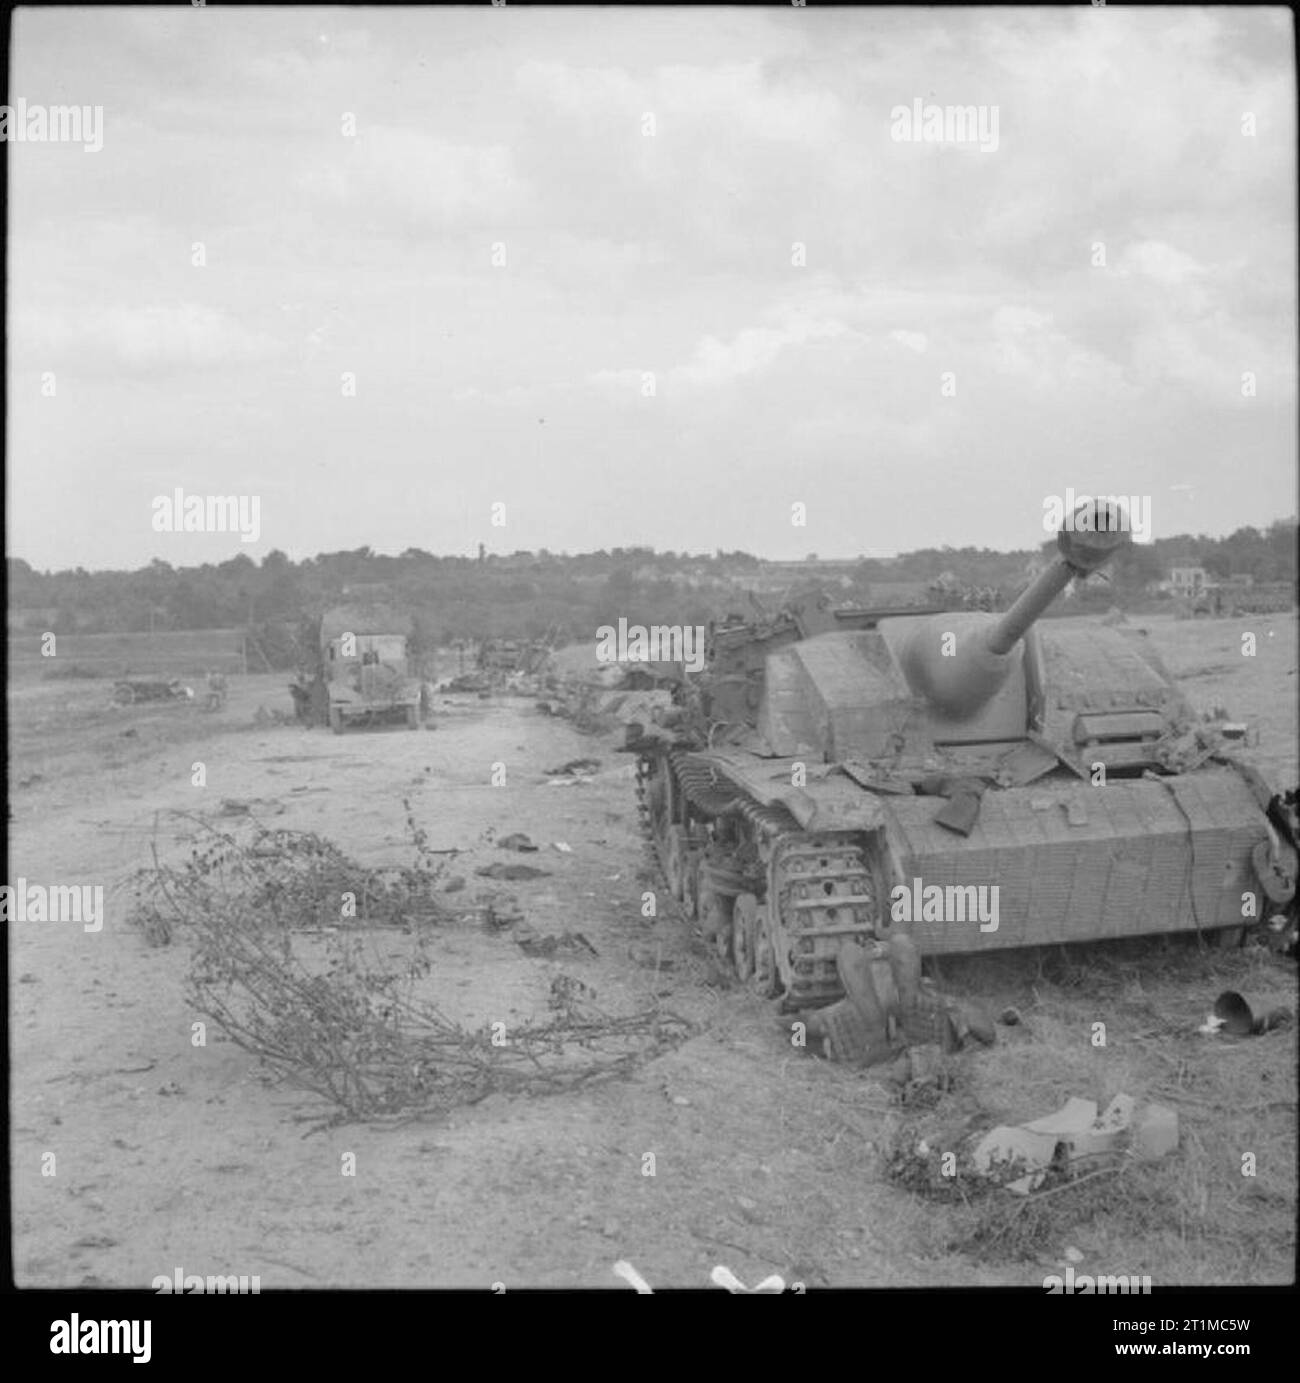 The British Army in the Normandy Campaign 1944 Knocked-out German StuG III assault gun and soft-skin vehicles shot up by Allied fighter-bombers, 21 August 1944. Stock Photo